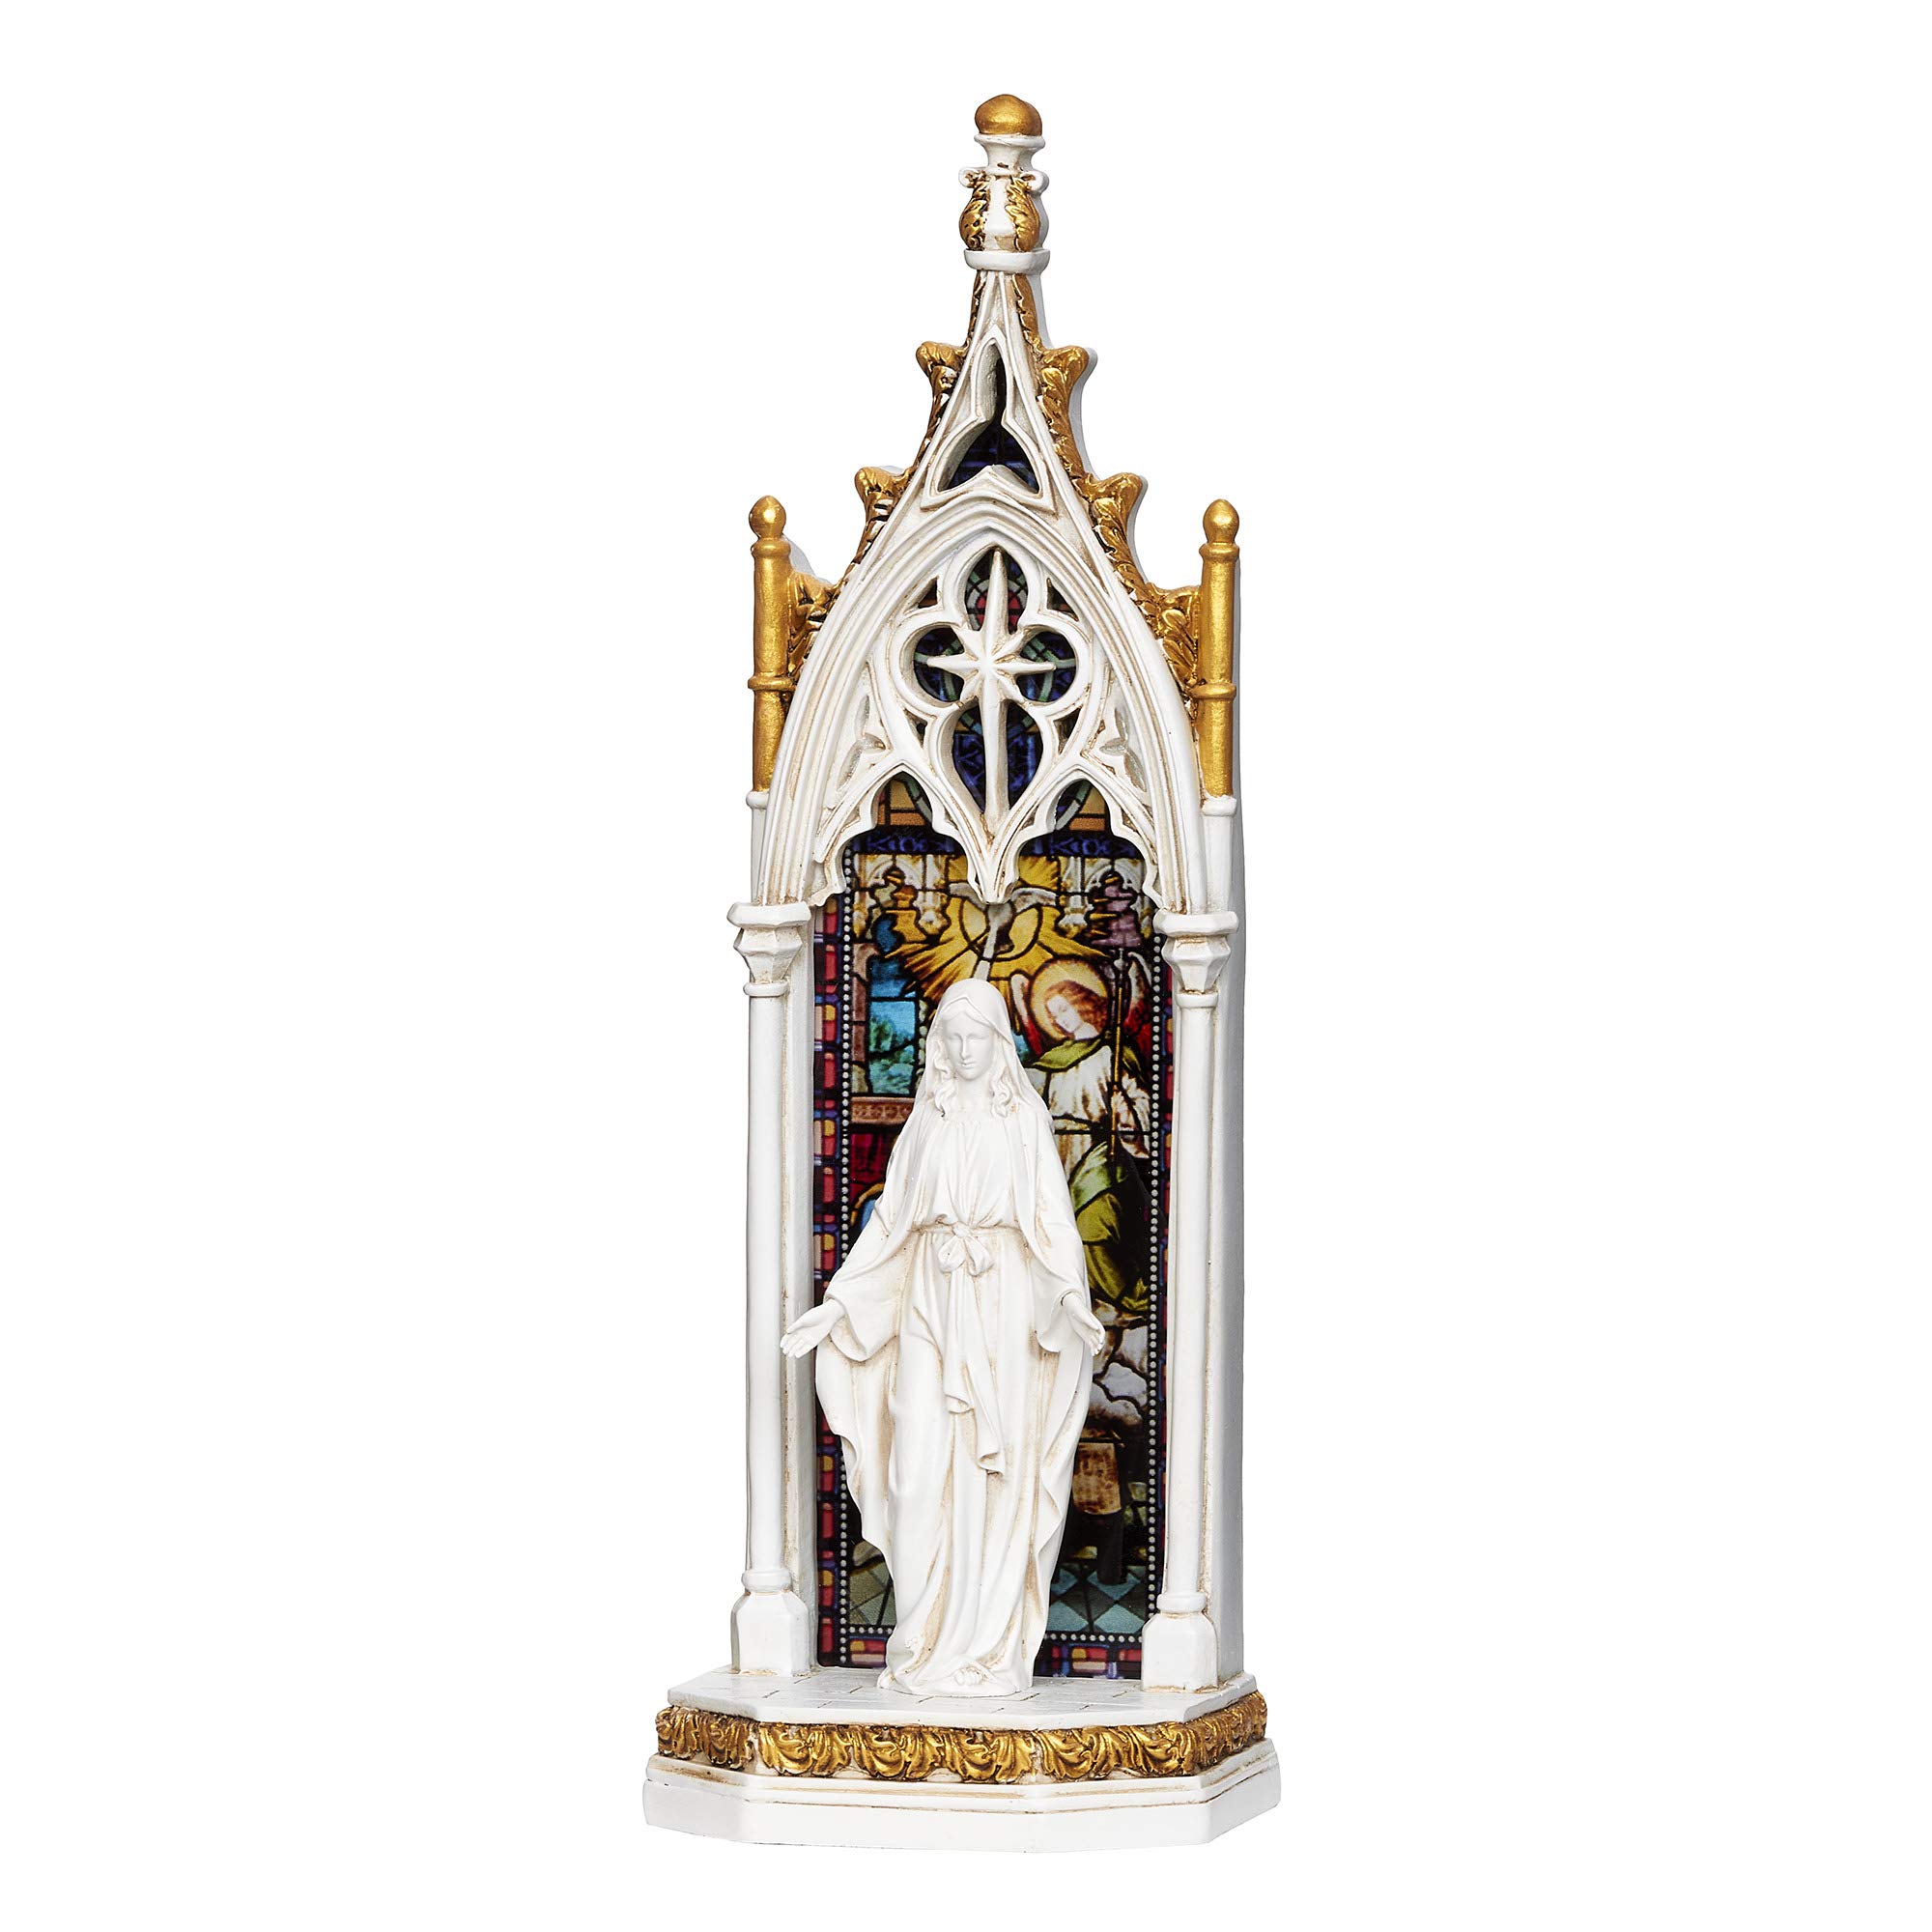 Joseph's Studio by Roman - Our Lady of Grace Arch Window LED Figure, Renaissance Collection, 11.75" H, Resin and Stone, Religious Gift, Dec...